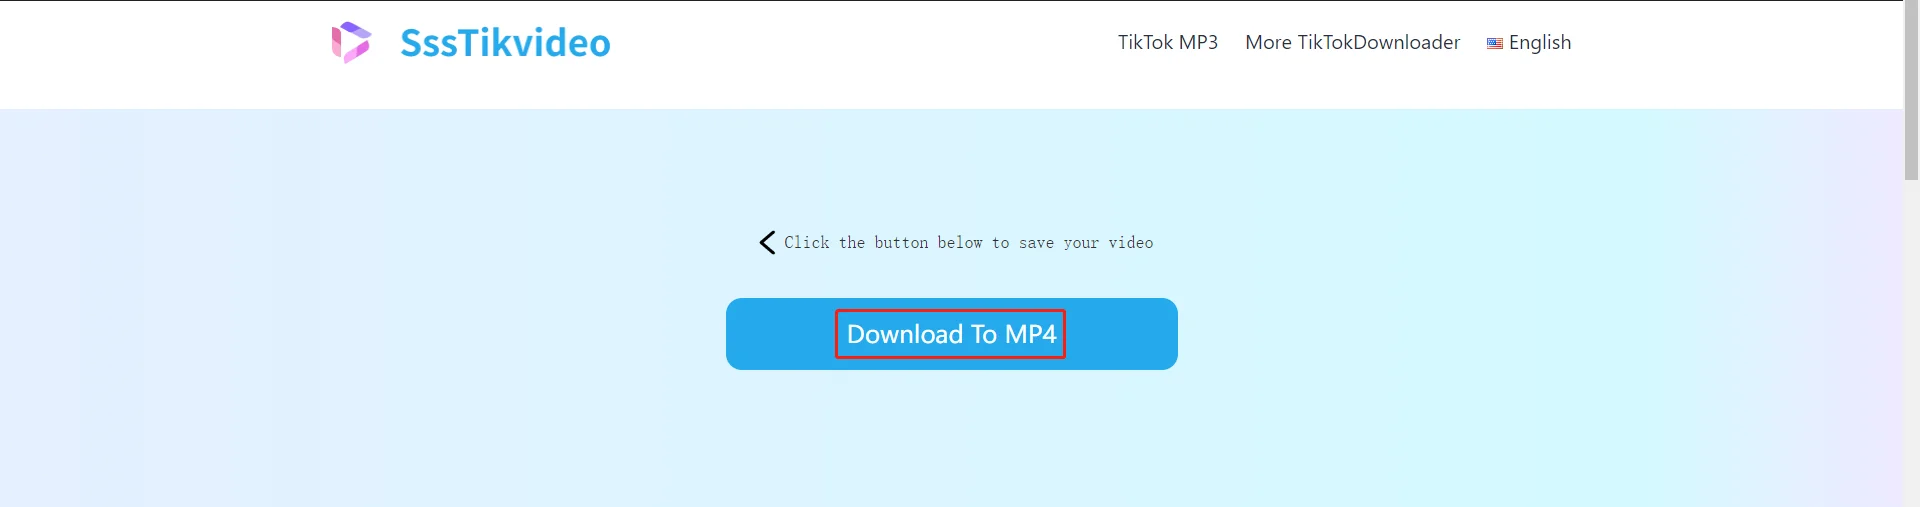 You may quickly download videos